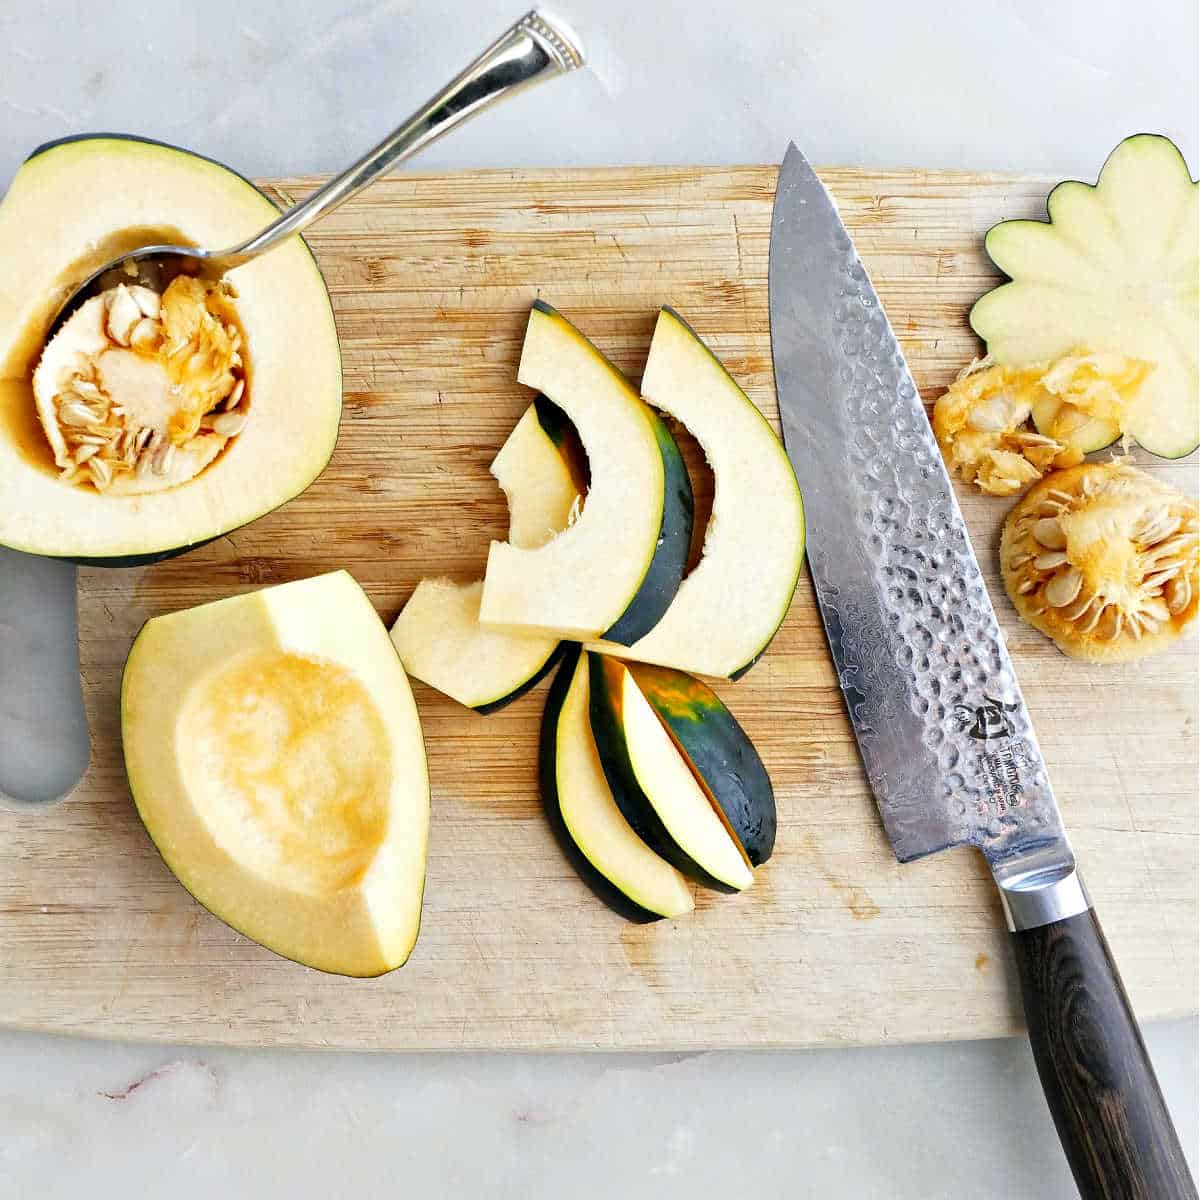 acorn squash being deseeded and sliced on a cutting board with a knife